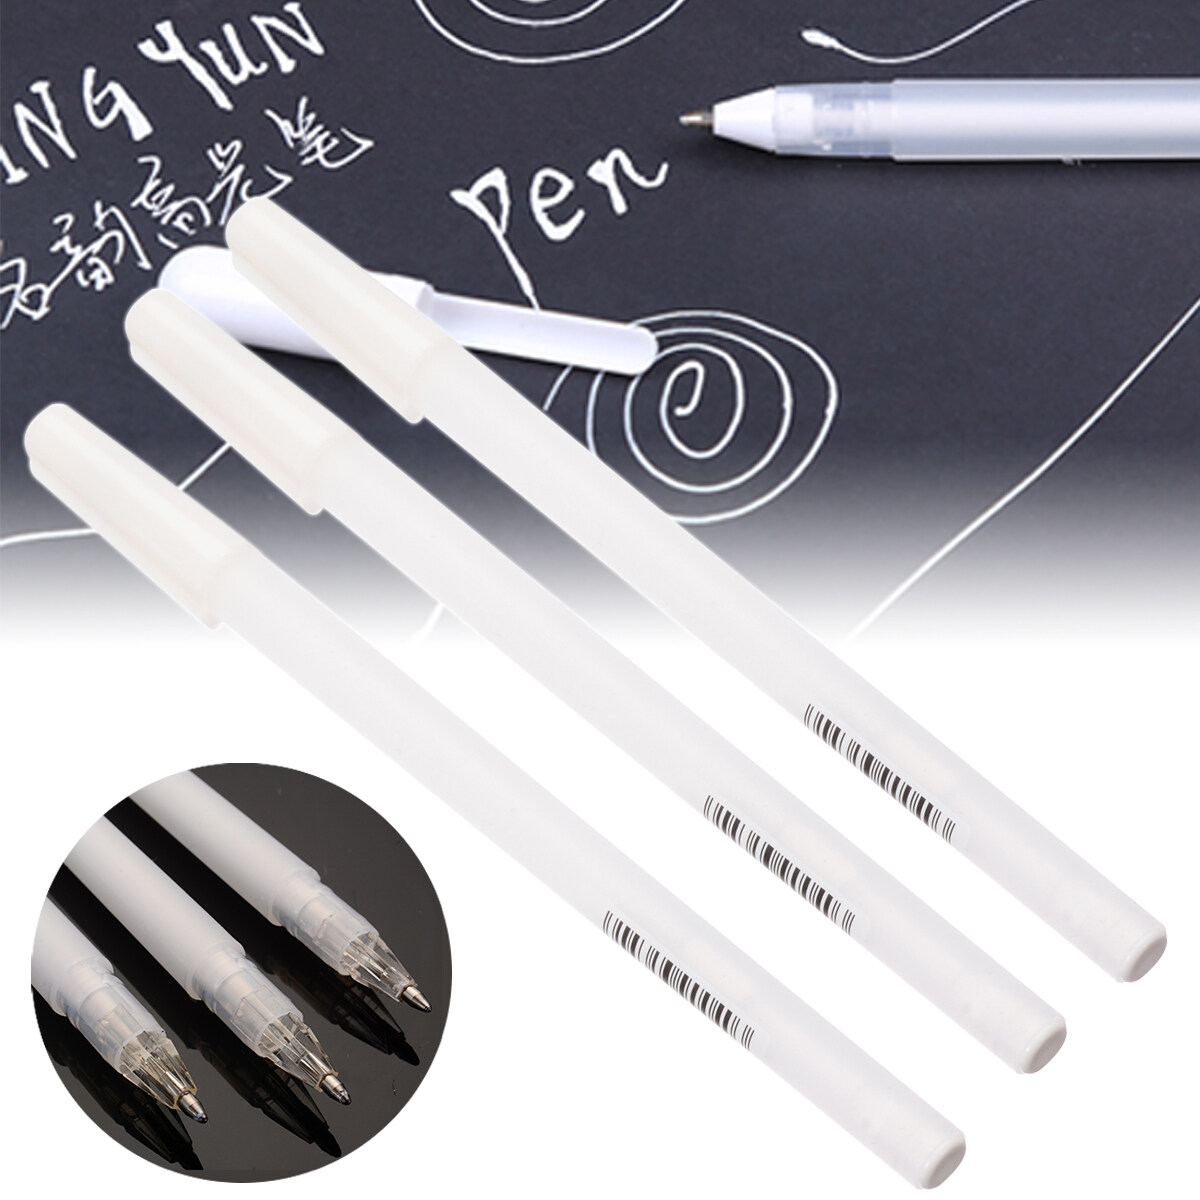 KPL 3pcs 0.8mm White Ink Color Photo Album Hand-painted Marker Gel Pen Stationery Office Supplies